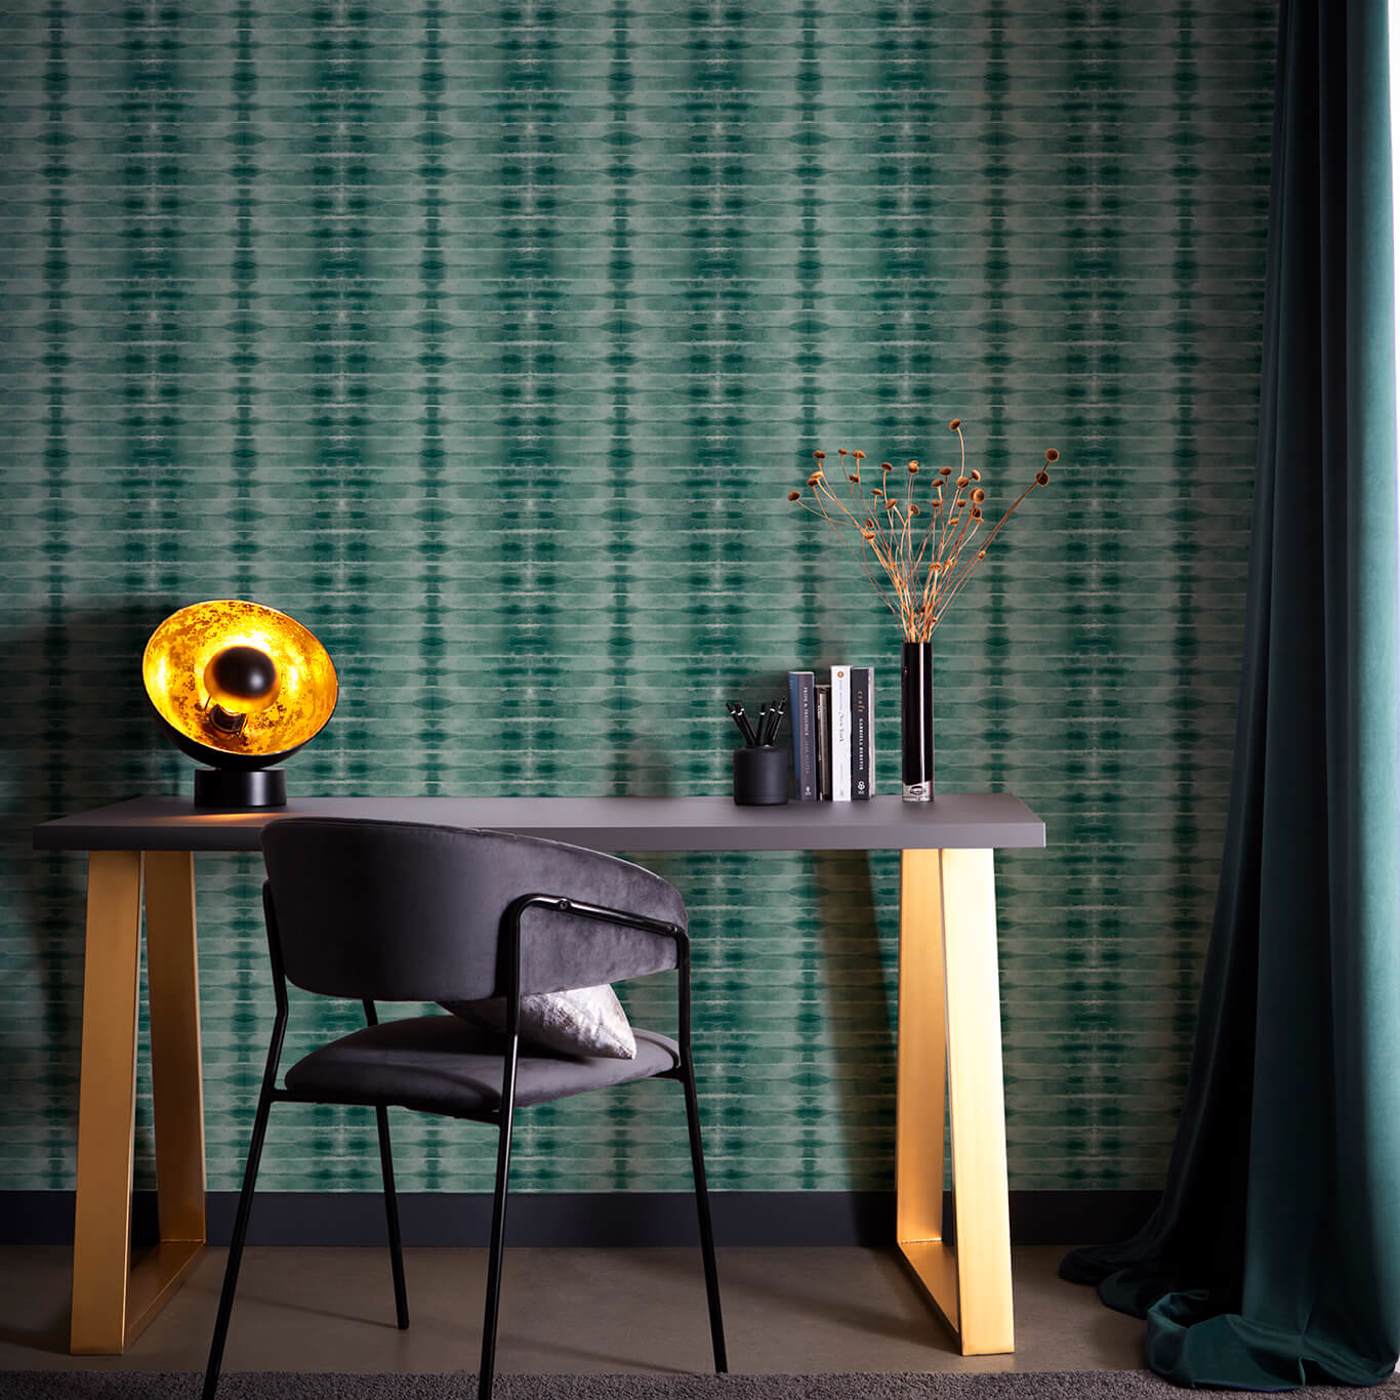 Eterea Teal Wallpaper by CNC